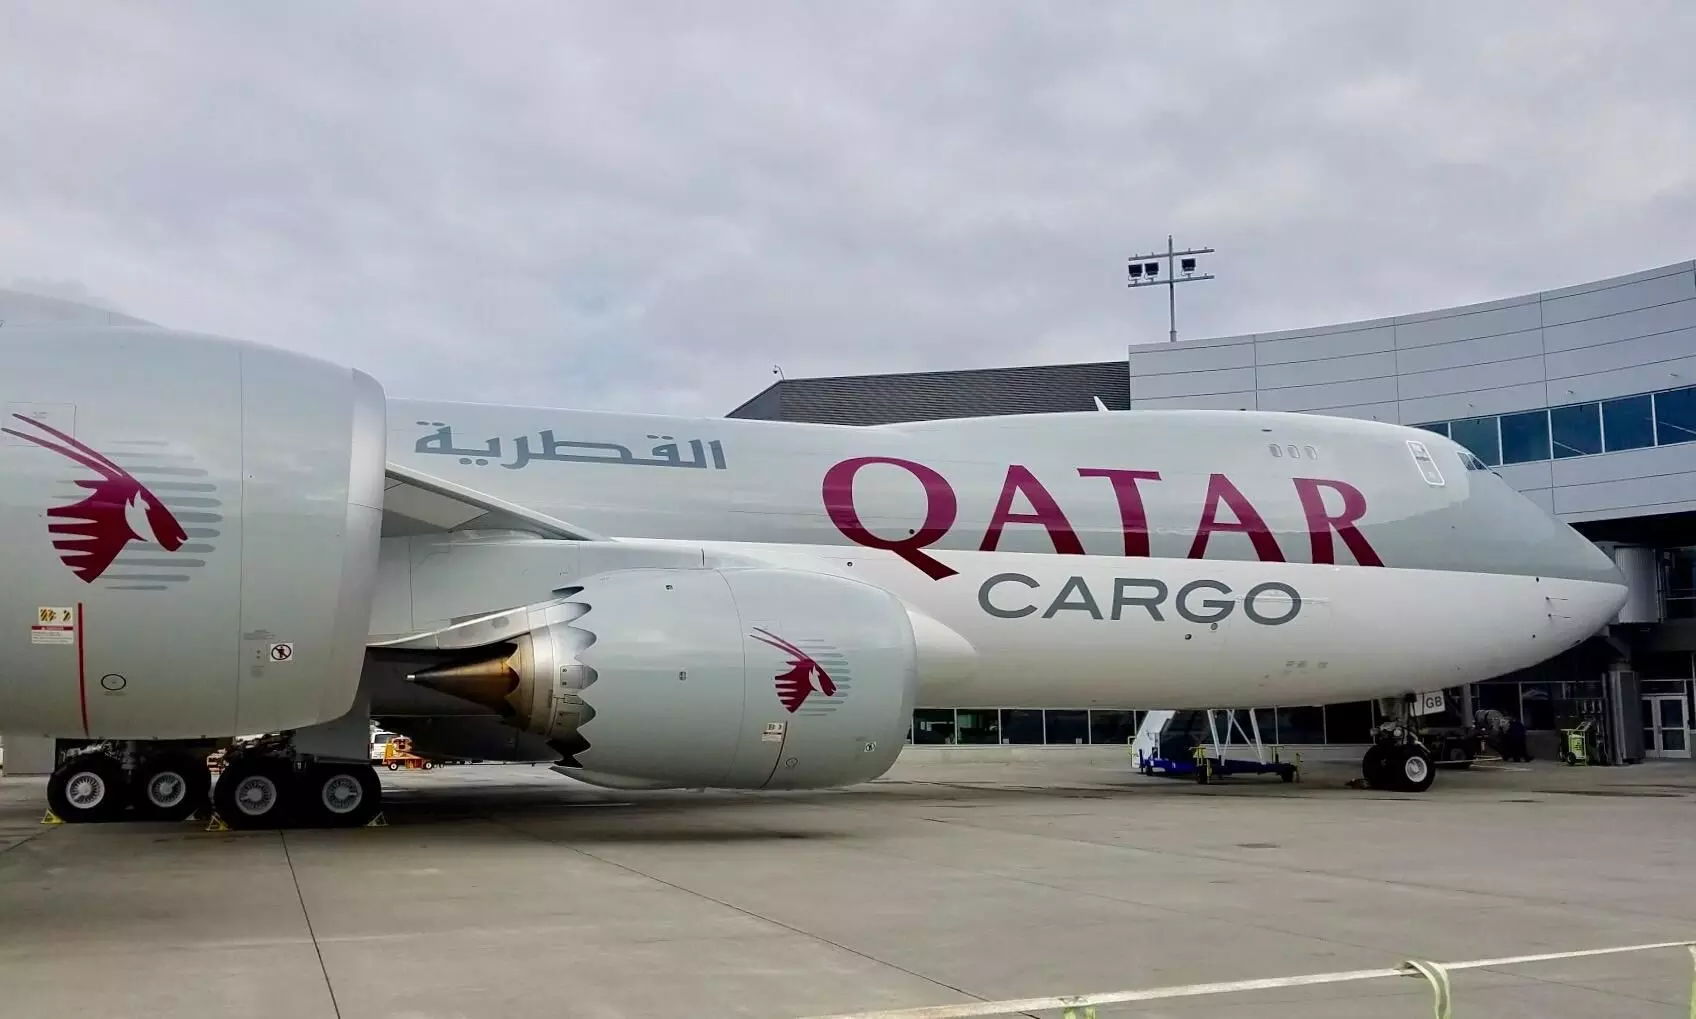 UPS adds two more B747-8Fs, picked up through Qatar, confirms UPS